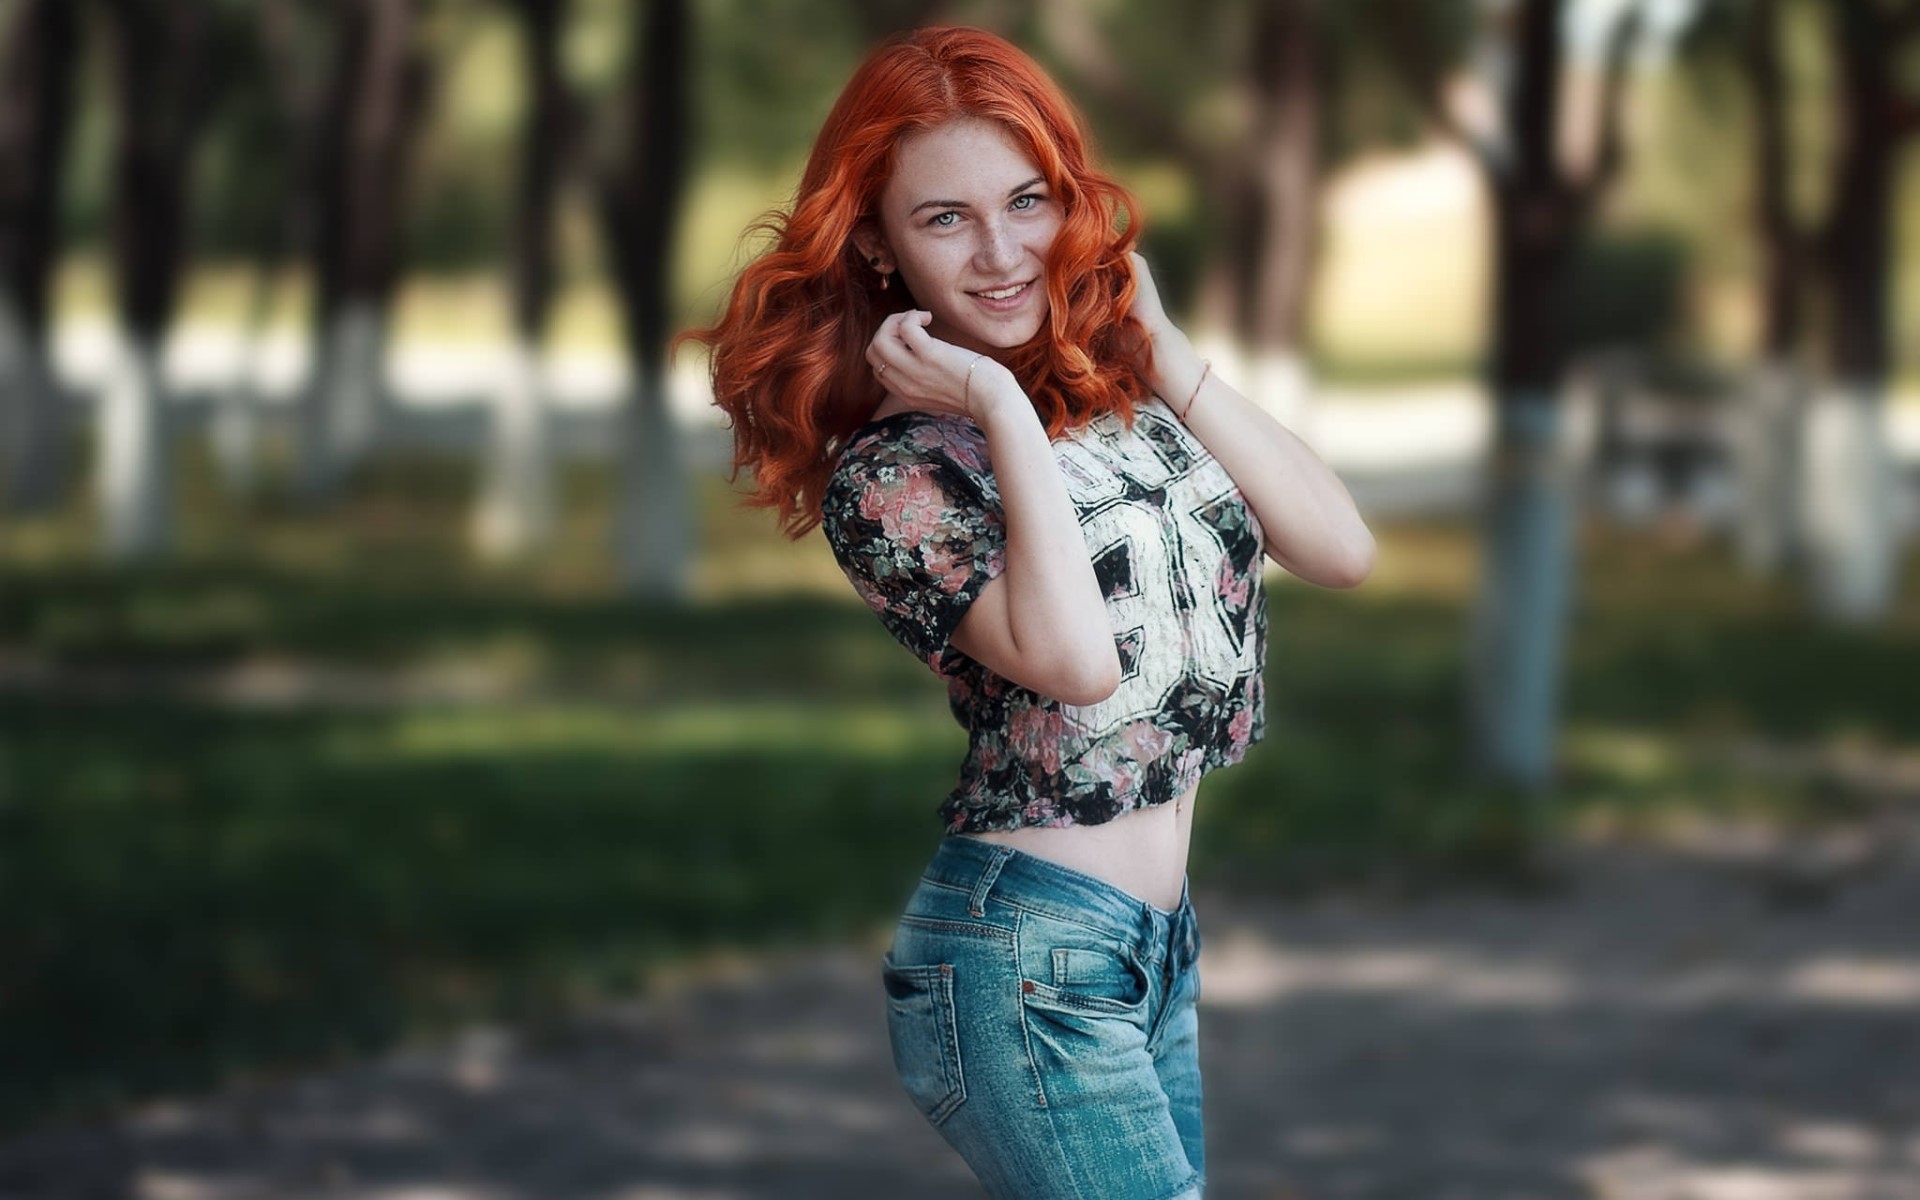 Redhead With Belly Button Piercing - HD Wallpaper 